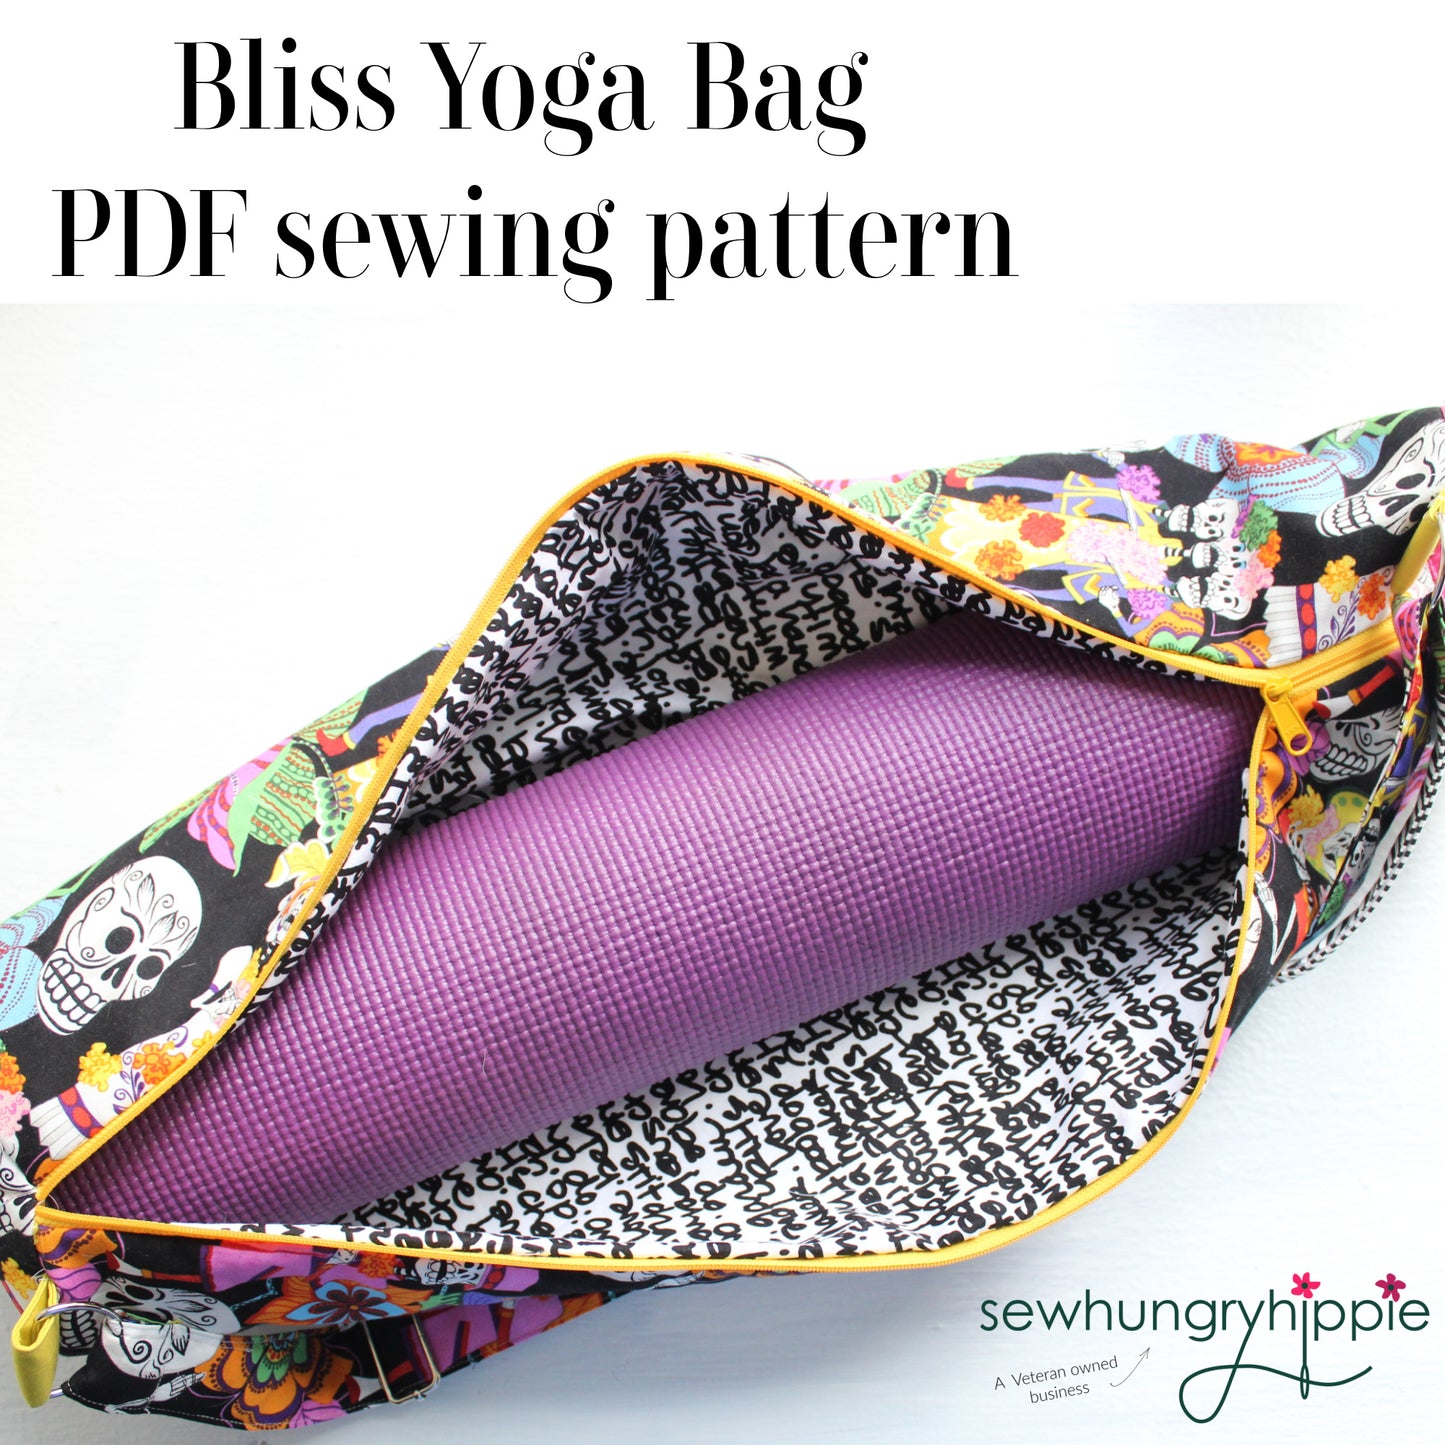 10 Things Yoga Taught Me About Sewing, Blog